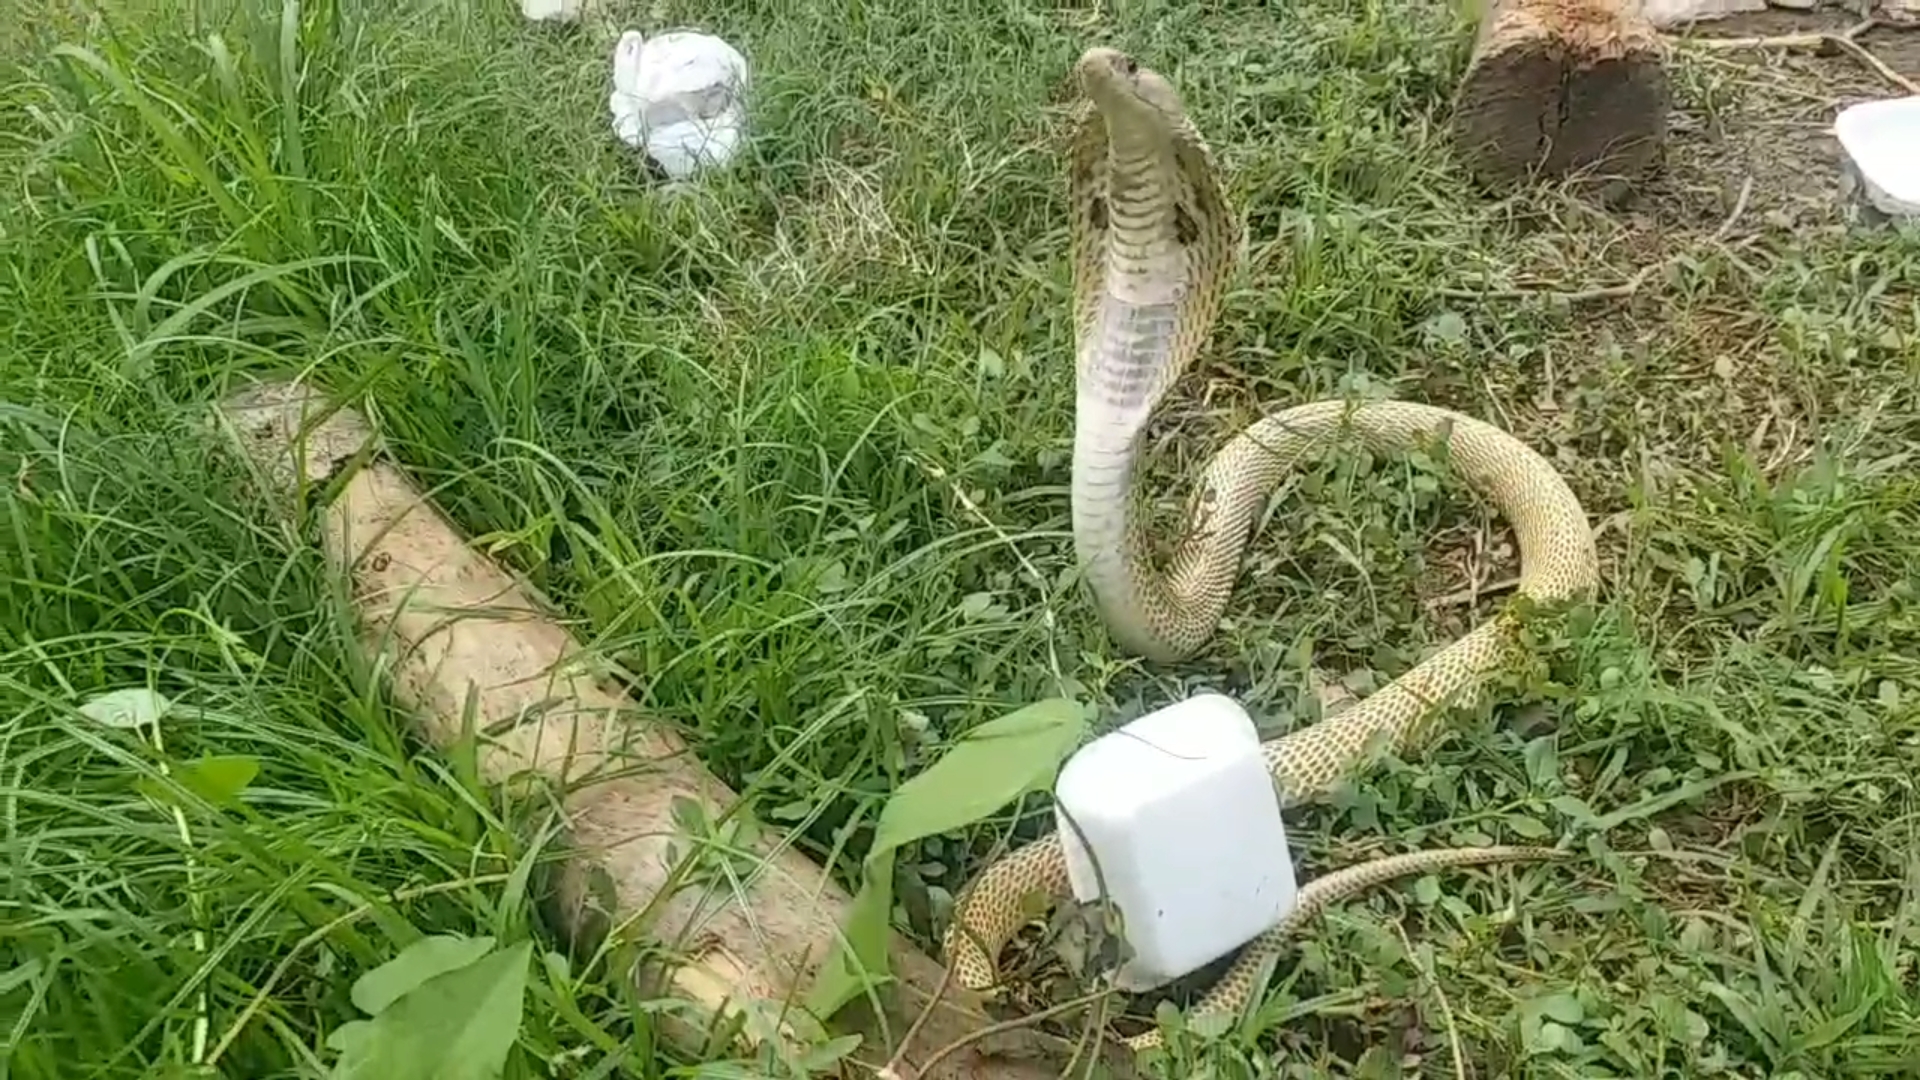 people died due to perform conjuring on snakebite in Jharkhand